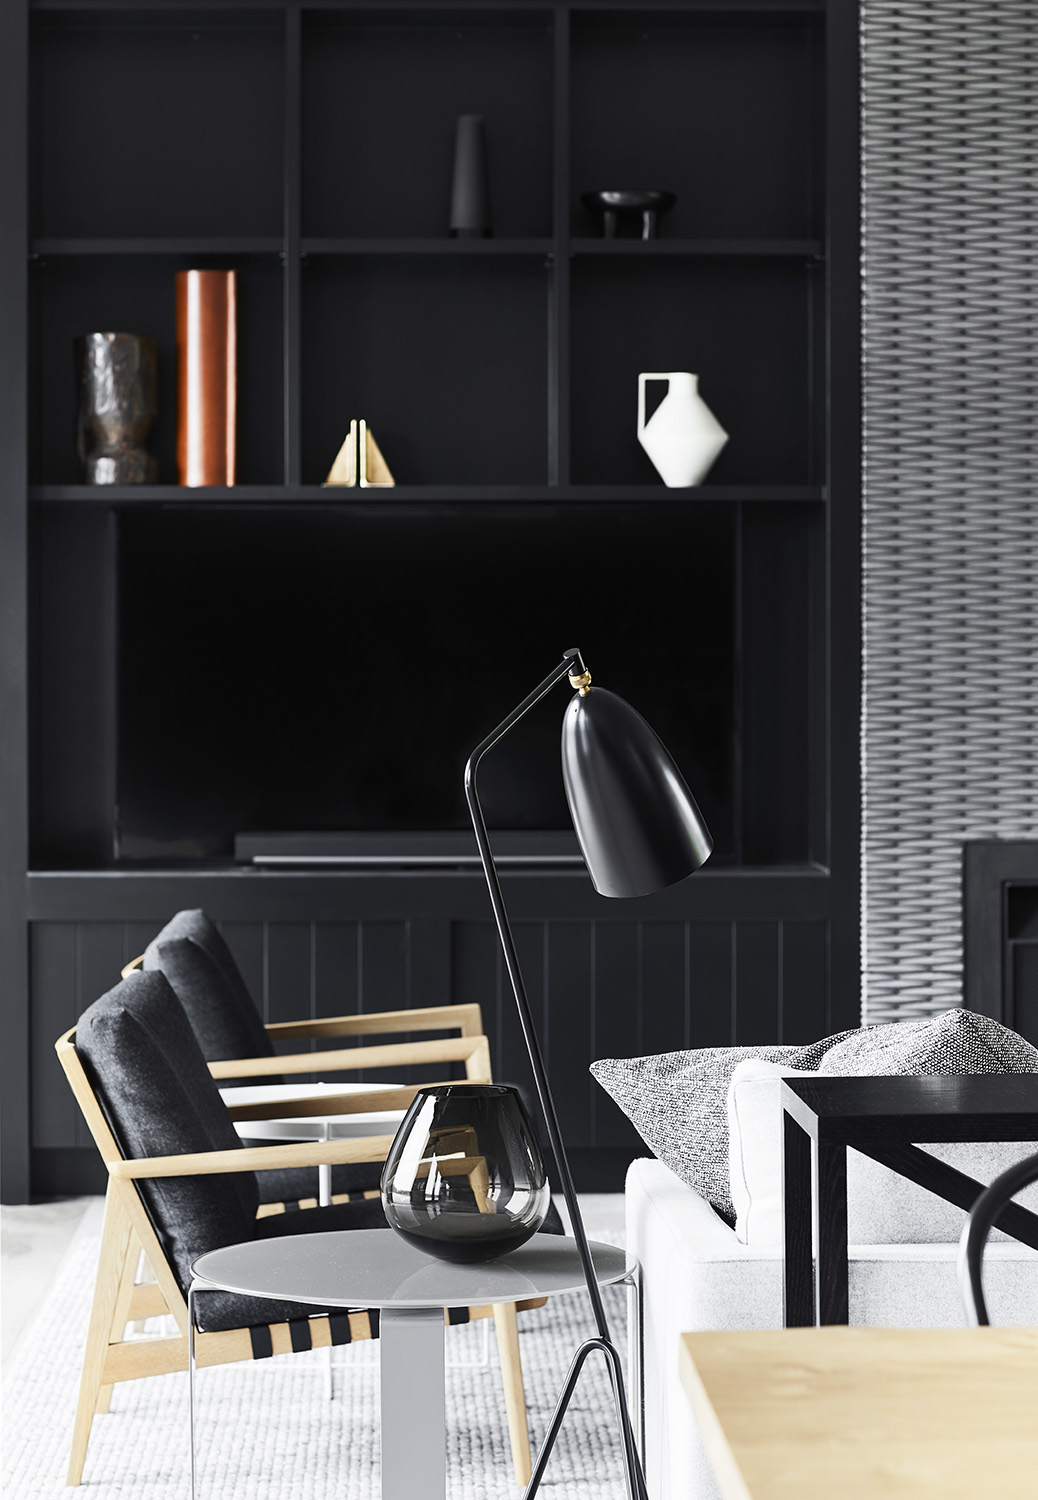 Modern black shelving and cabinetry can be found on either side of a focal fireplace with a silvery-grey tiled surround.